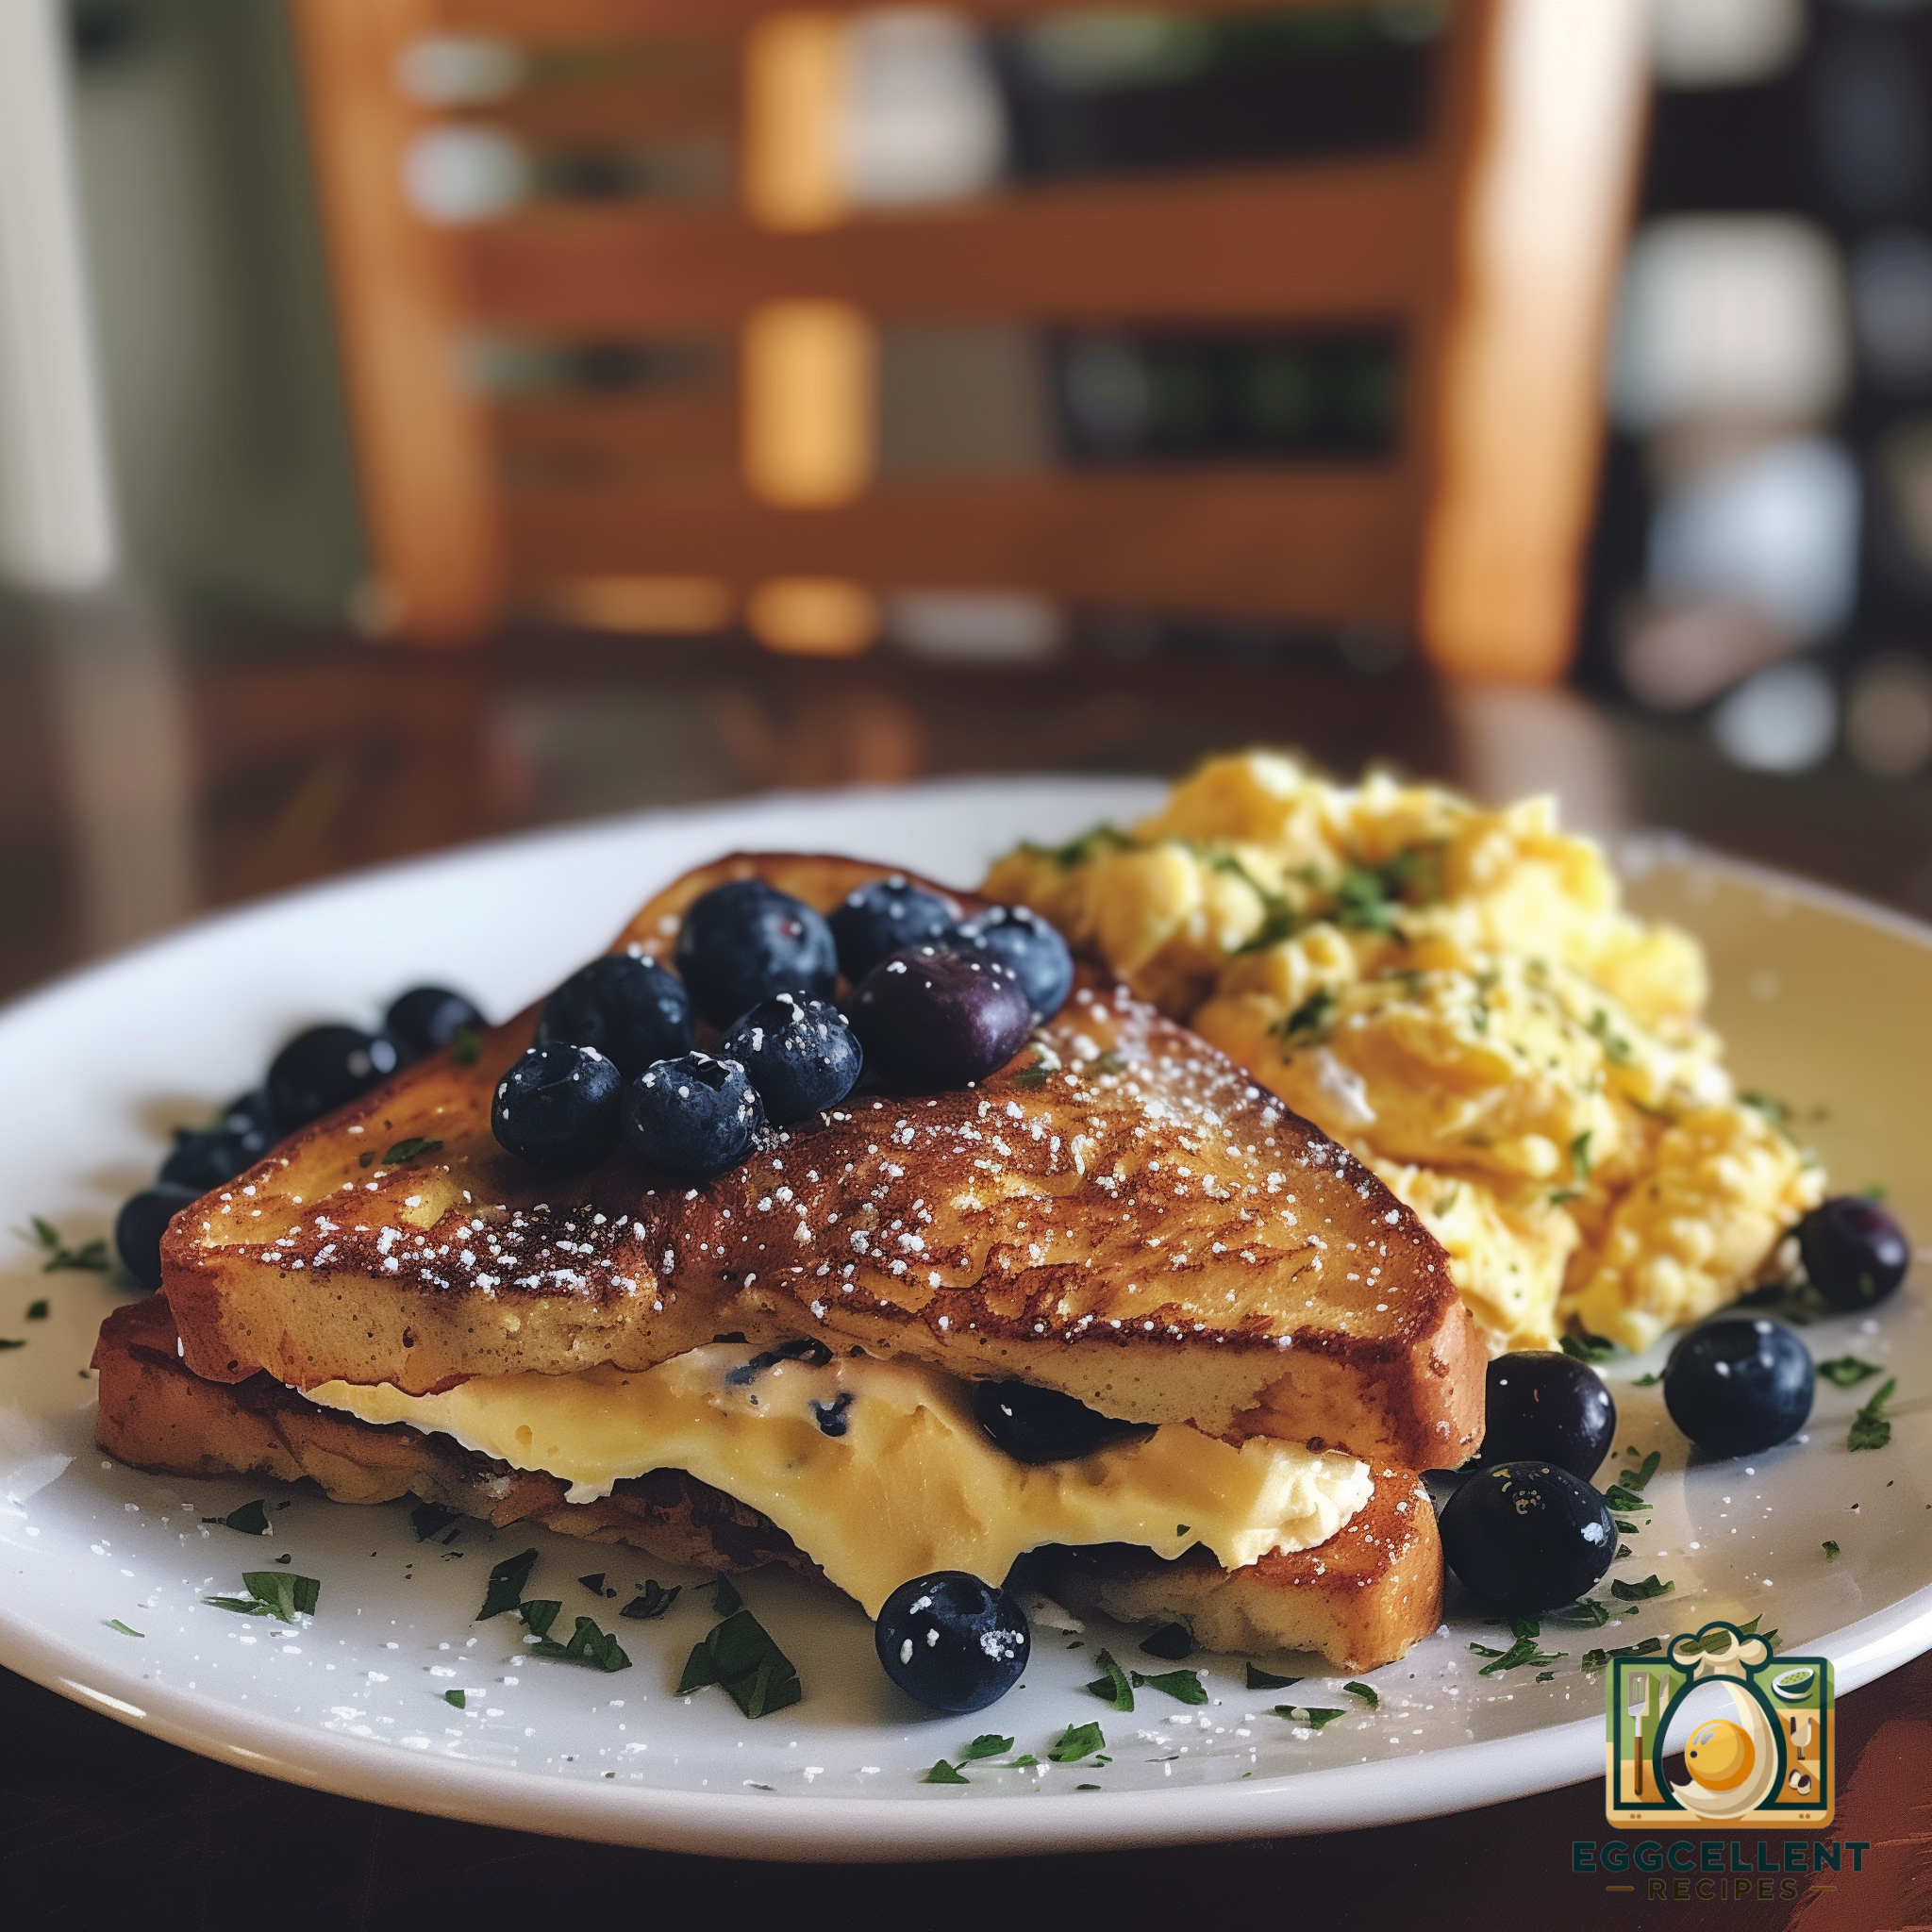 Blueberry and Cream Cheese Stuffed French Toast with Scrambled Eggs Recipe